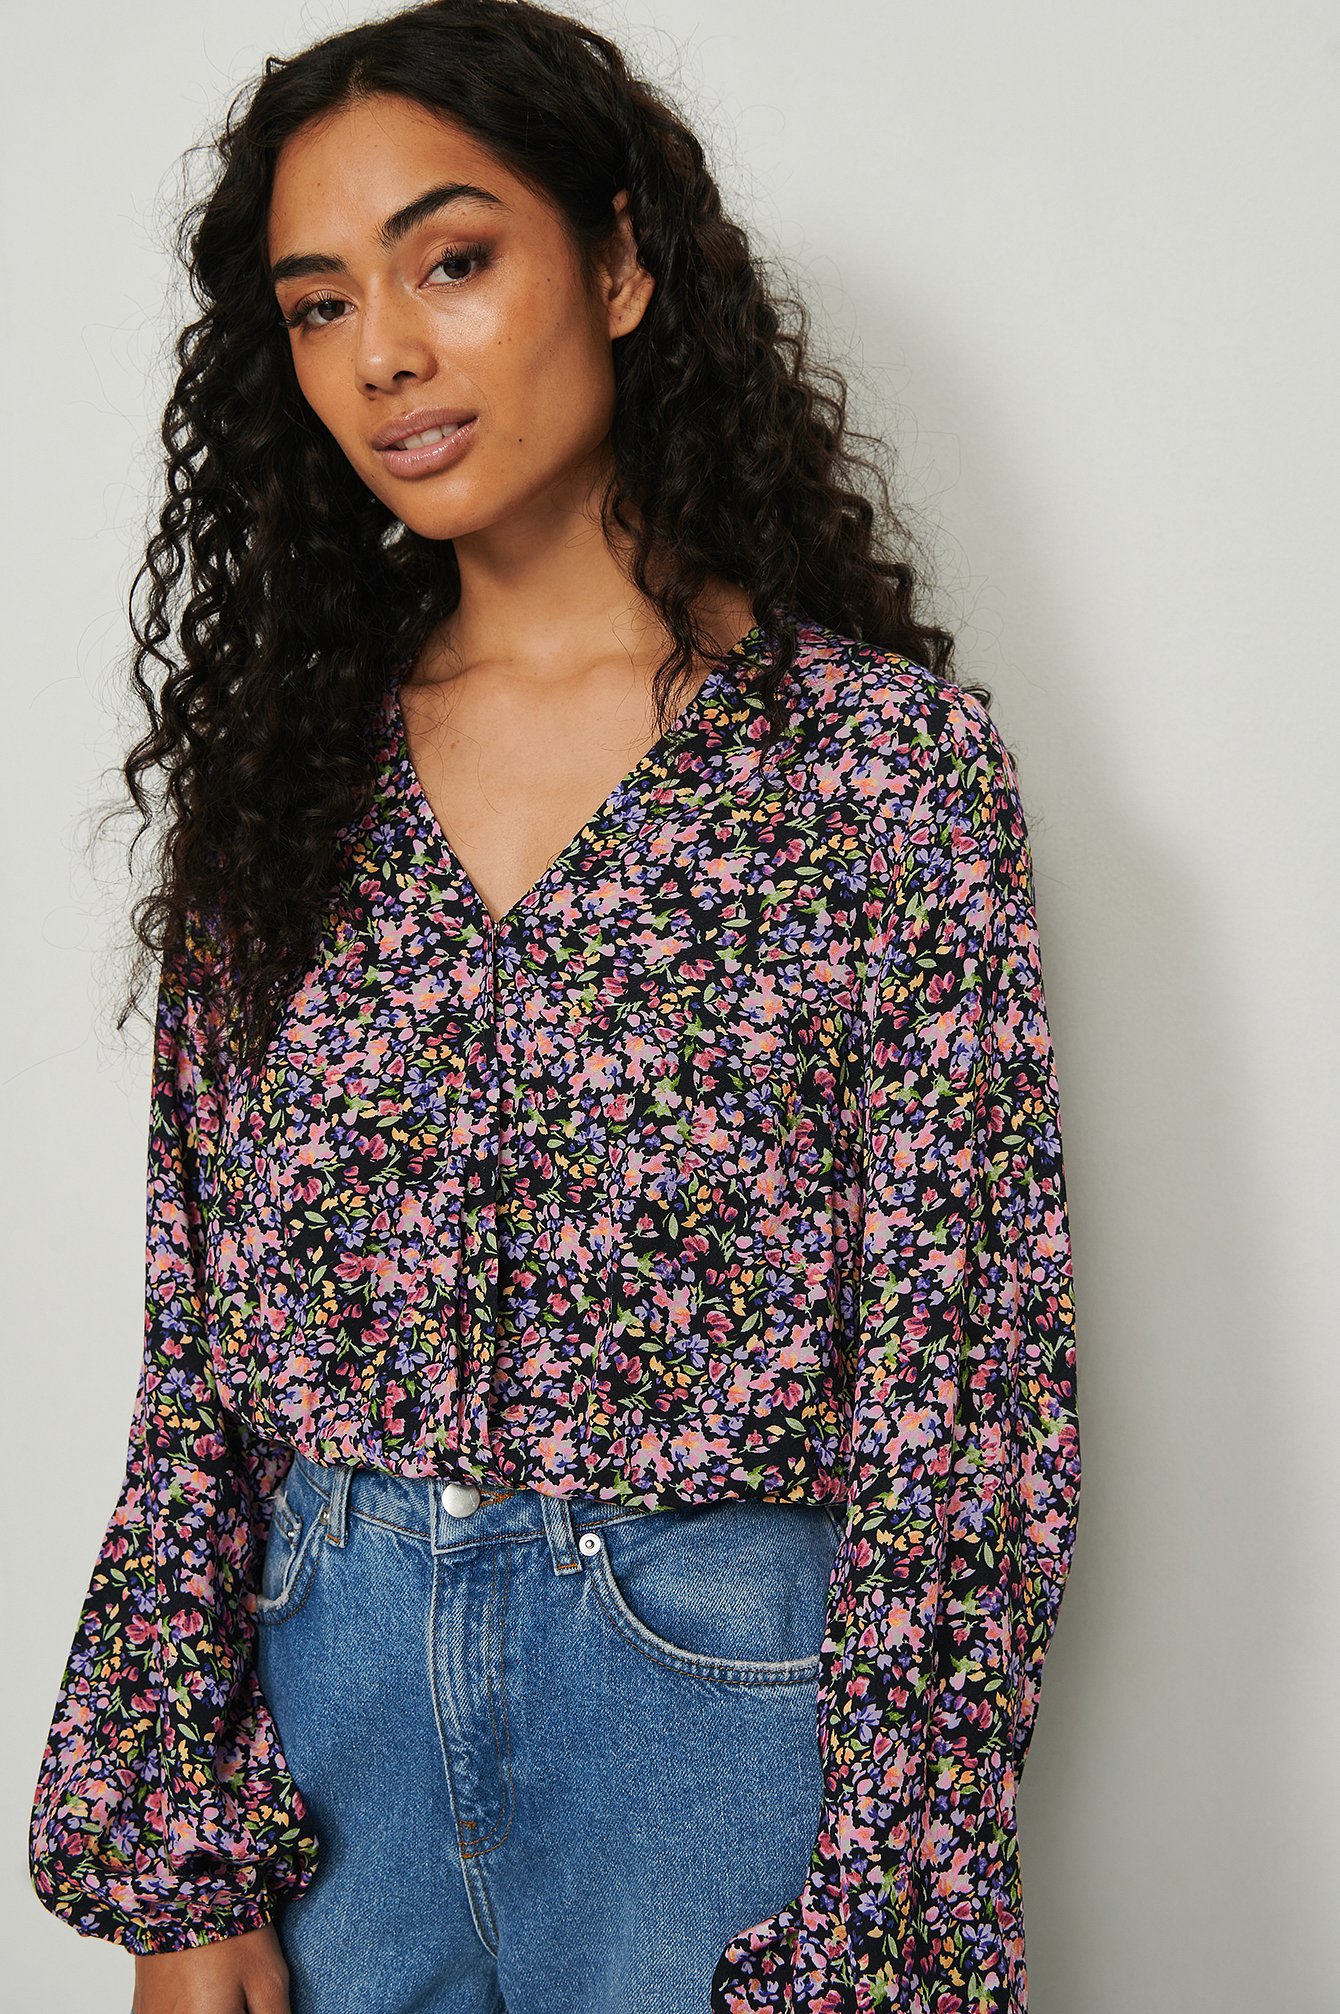 Printed Overlap Ls Blouse Outfit